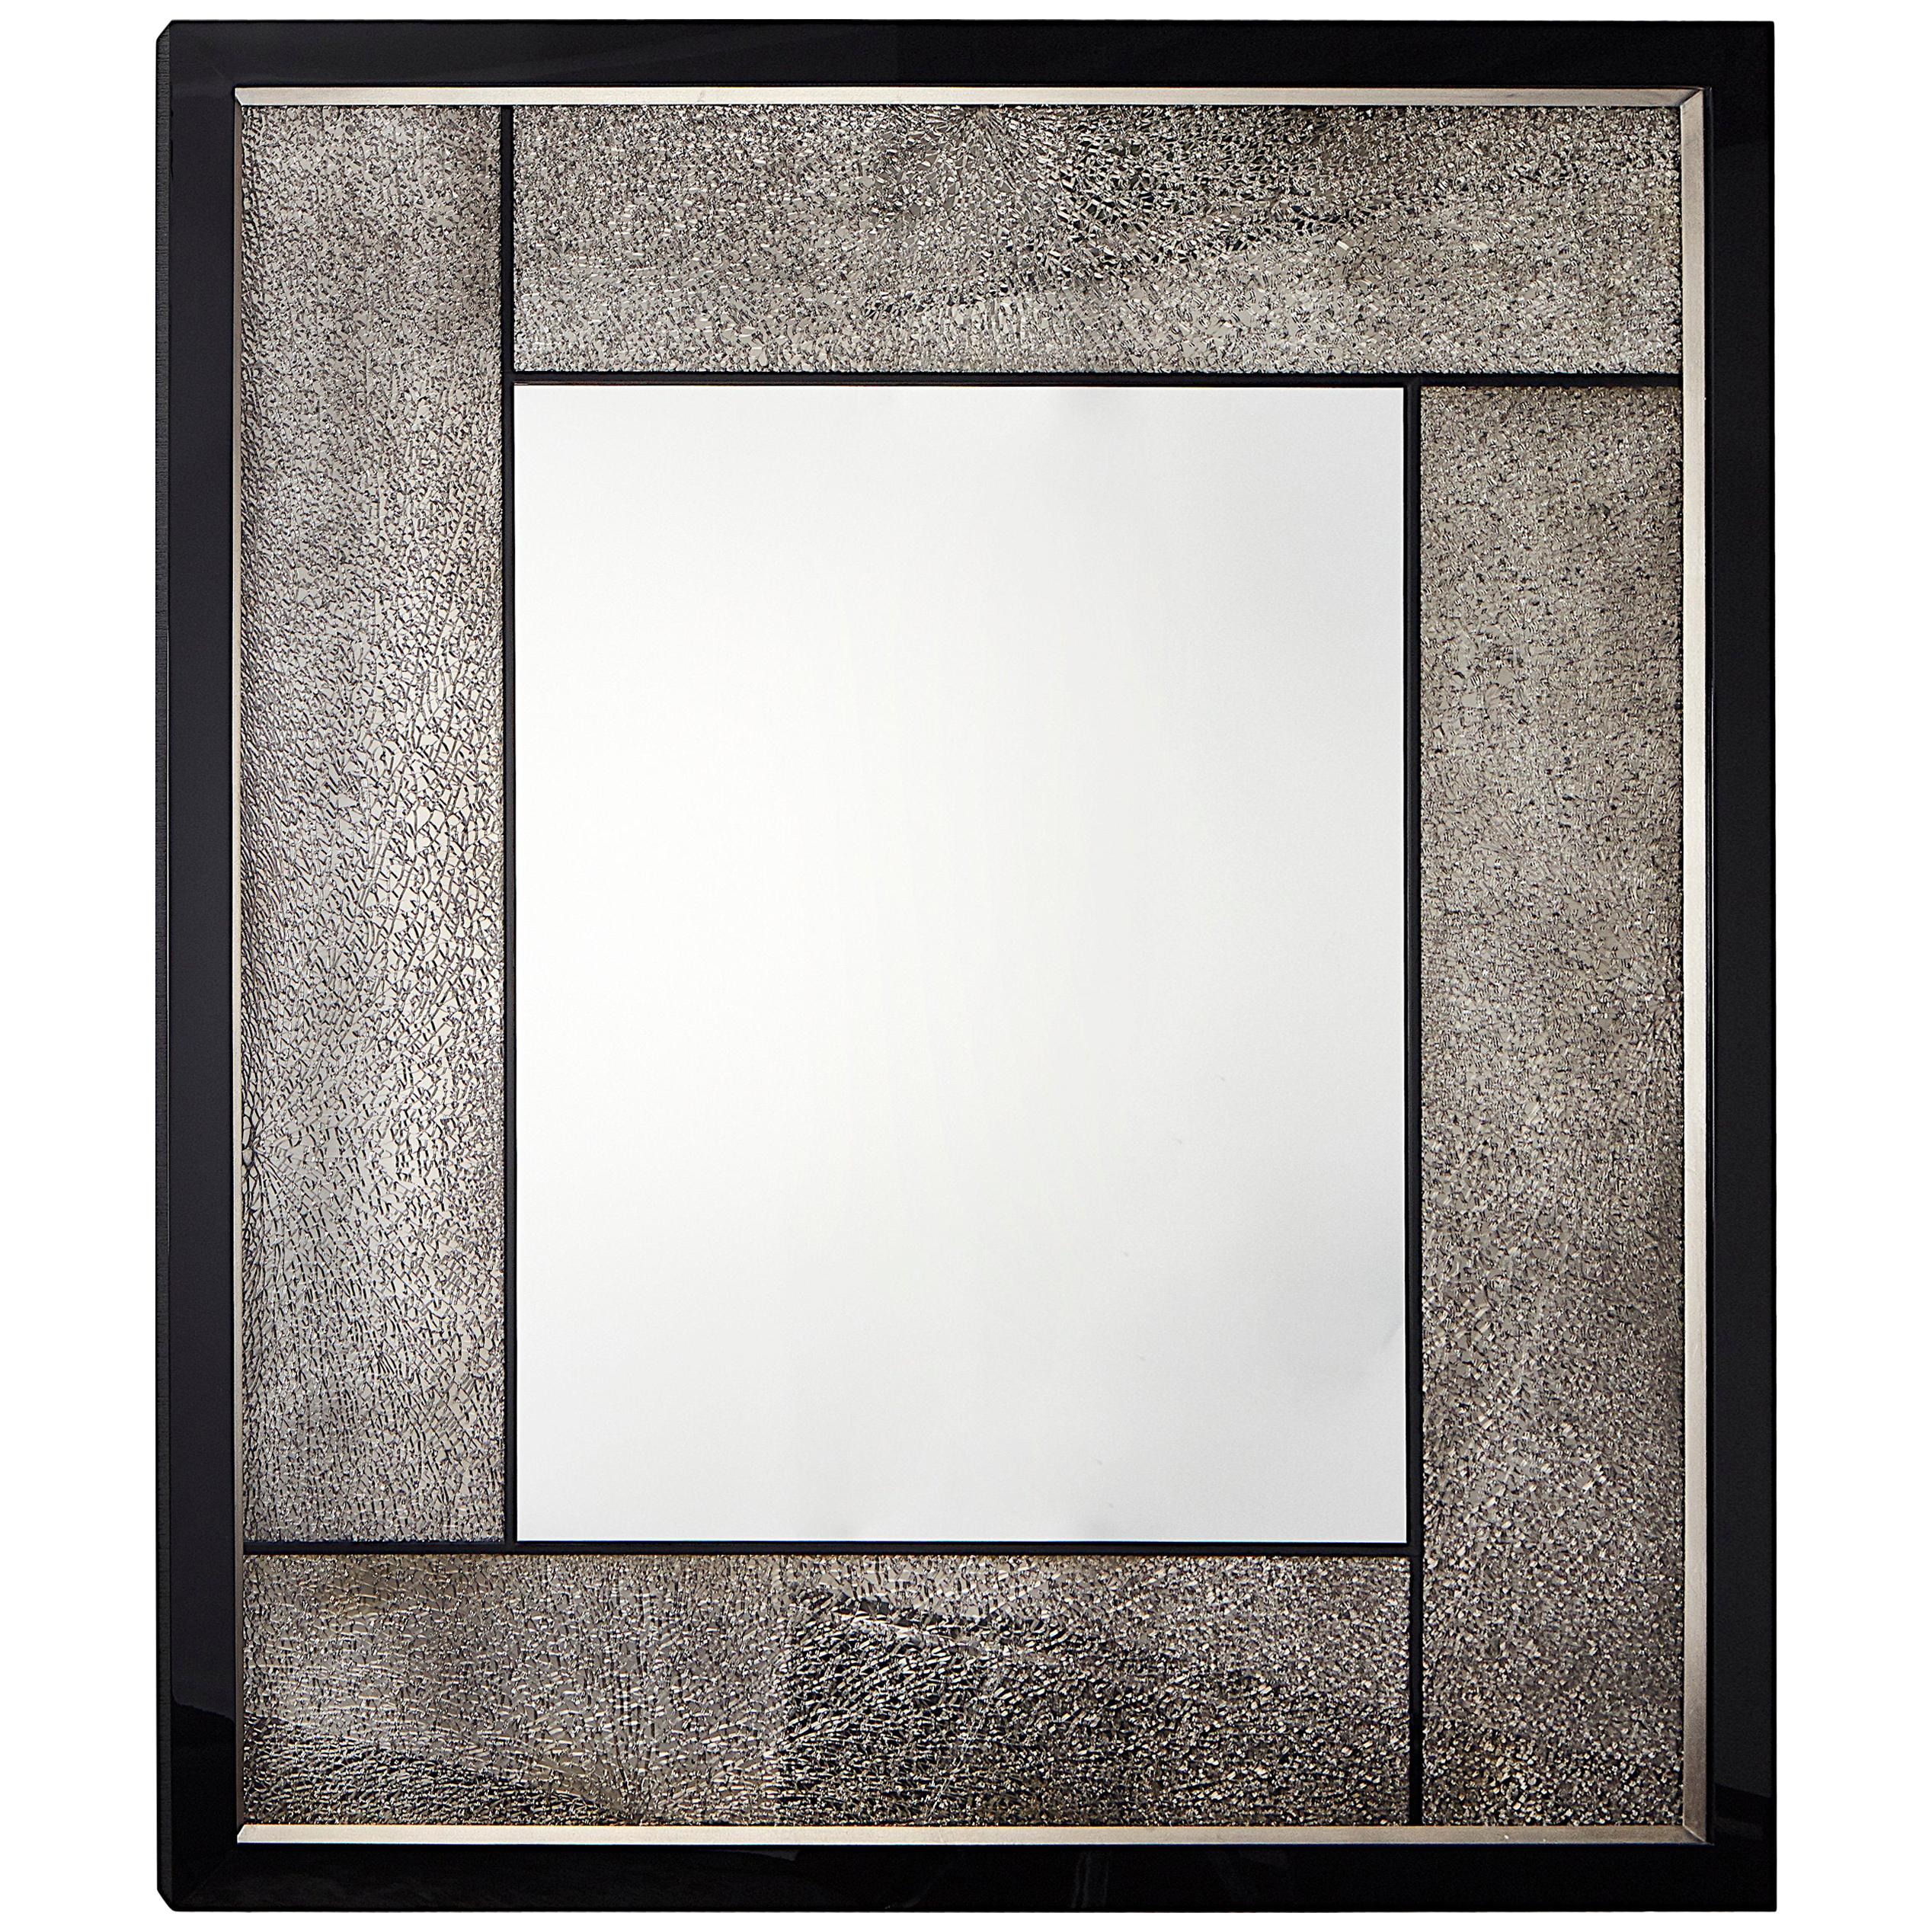 Big Mirror with Cracked Glass and Piano Black/Silver Leaf Frame, Customizable im Angebot